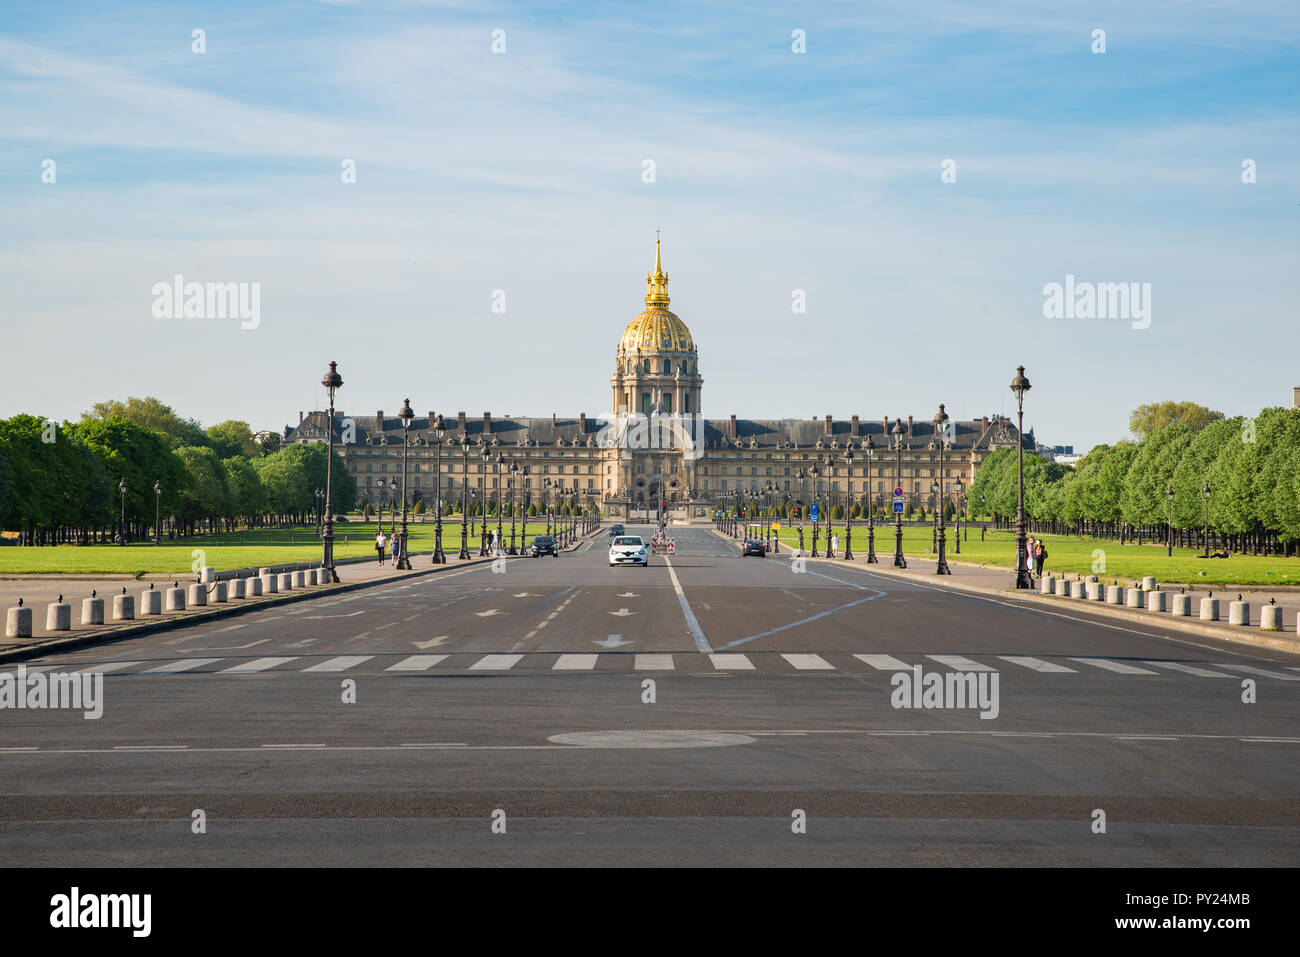 Les Invalides (National Residence of the Invalids) - complex of museums and monuments in Paris, France. Stock Photo